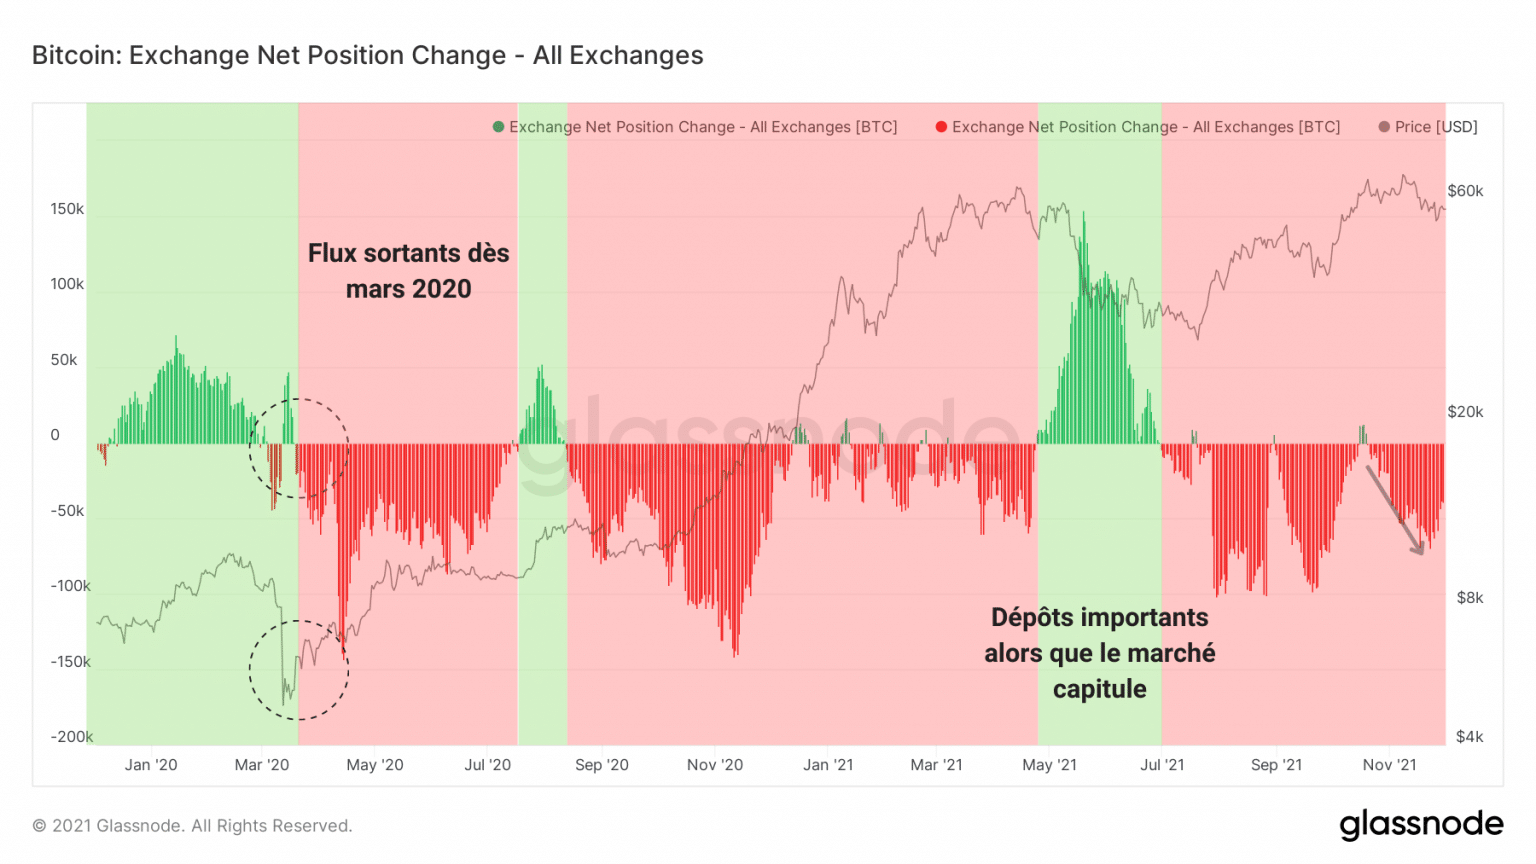 Chart of the change in the net position of exchanges (Source: Glassnode)